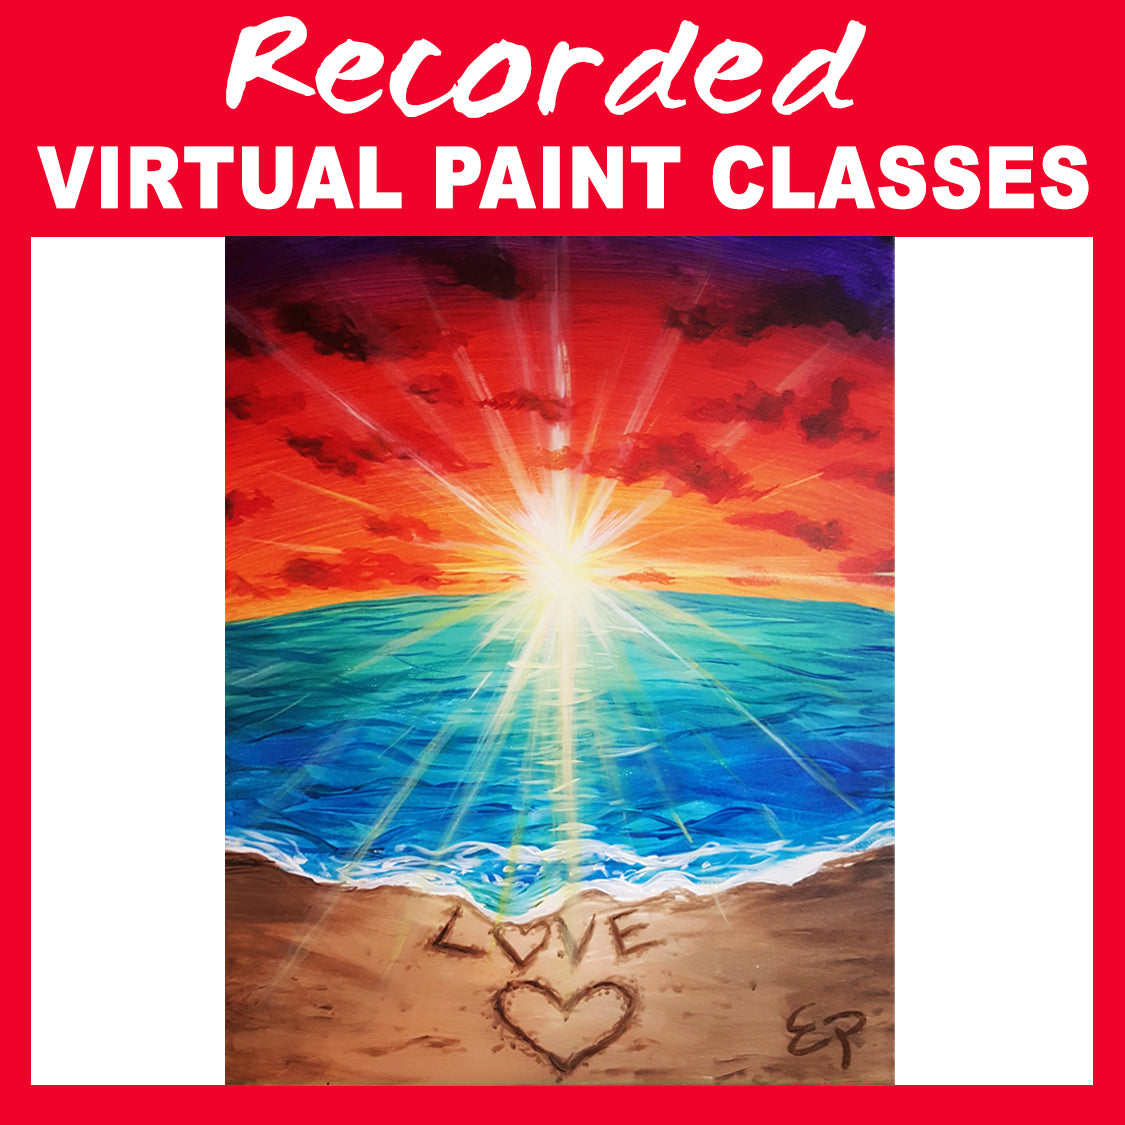 "Love On The Beach" Recorded Virtual Paint Class